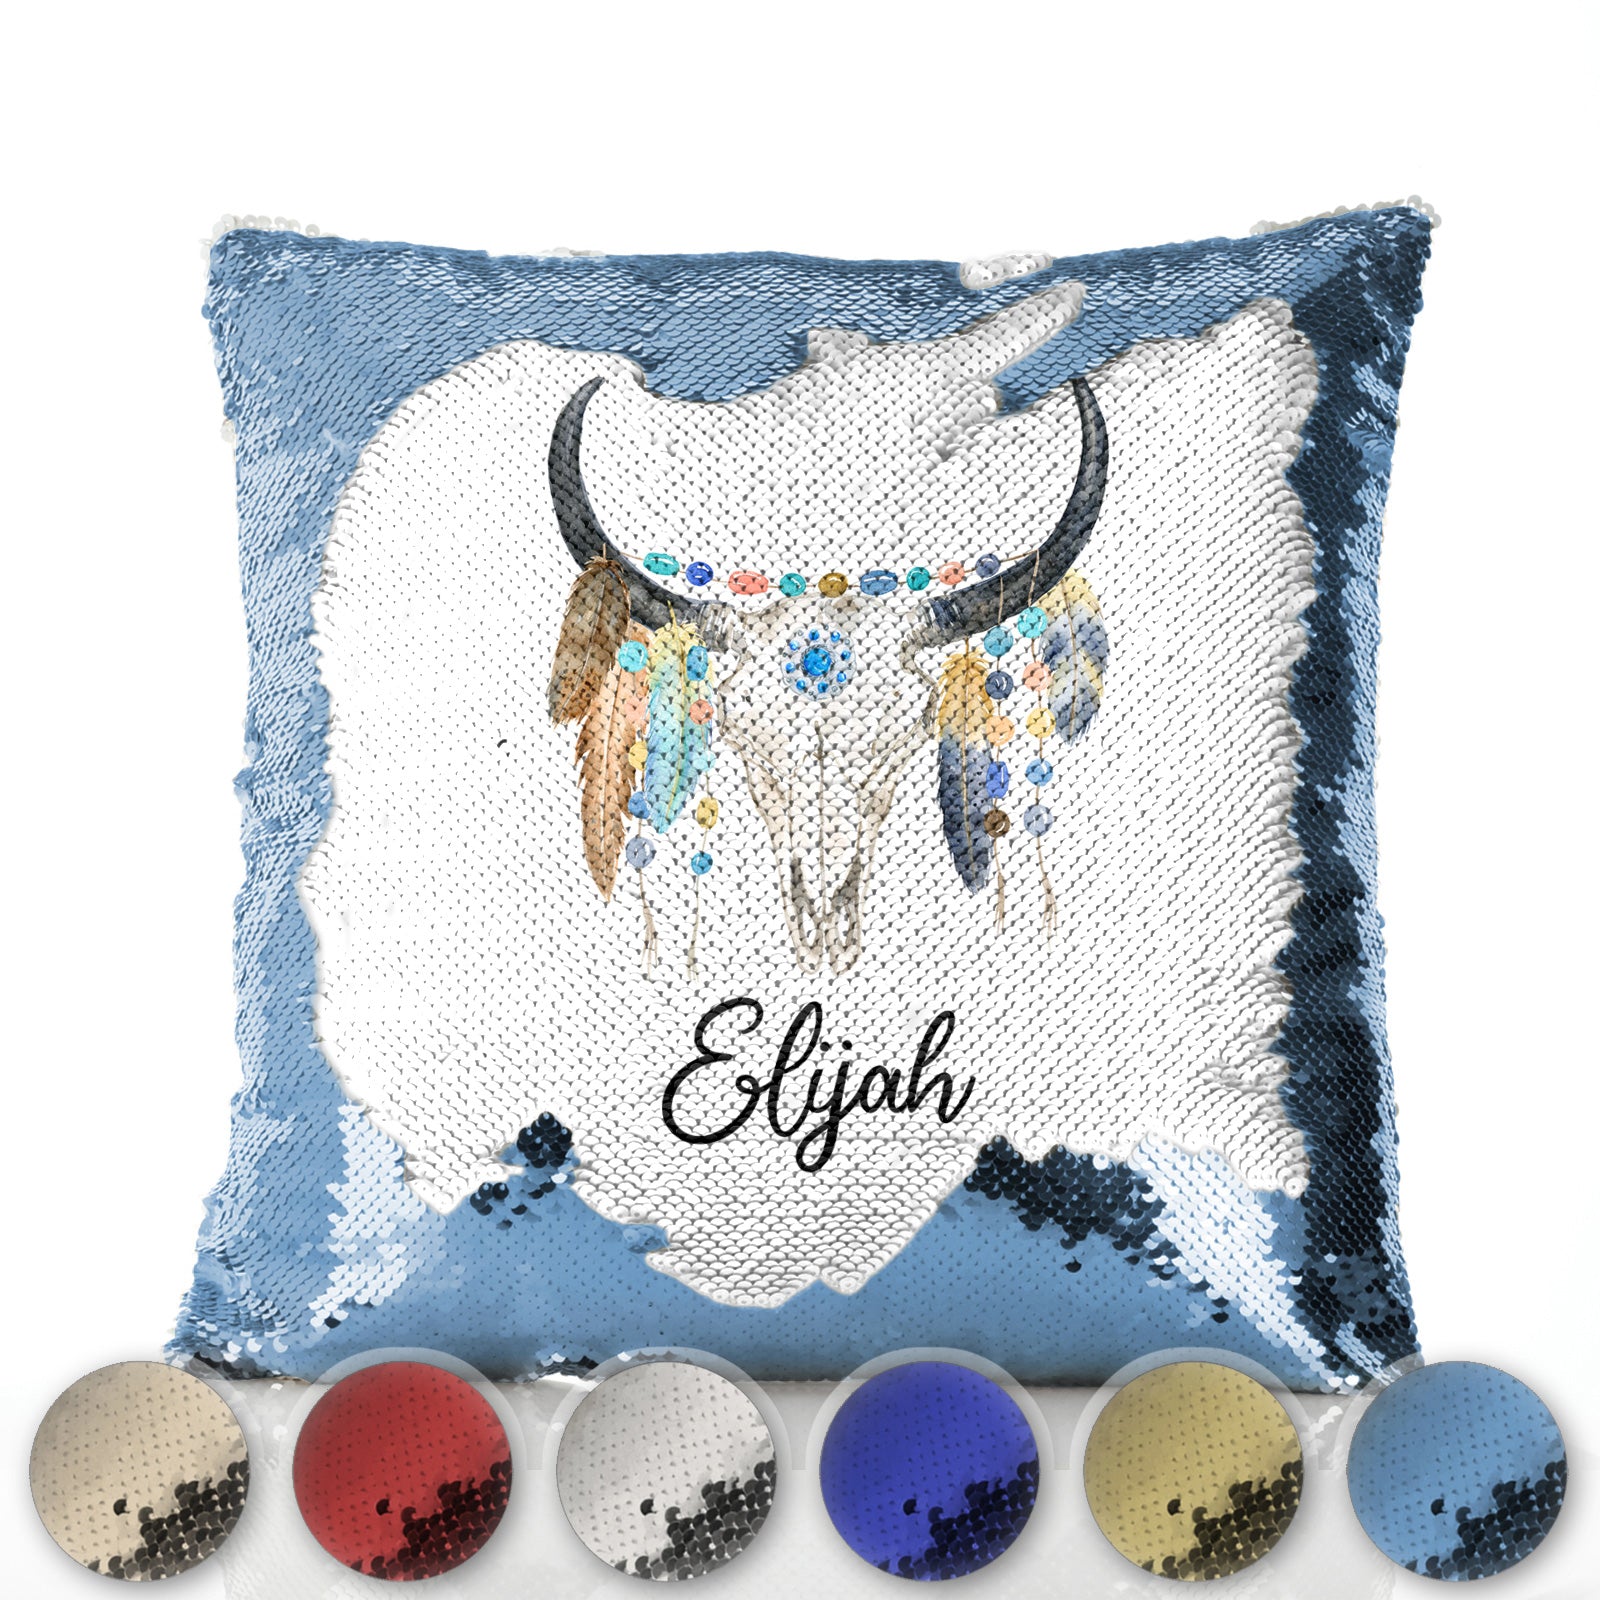 Personalised Sequin Cushion with Cow Skull Feathers and Cute Text